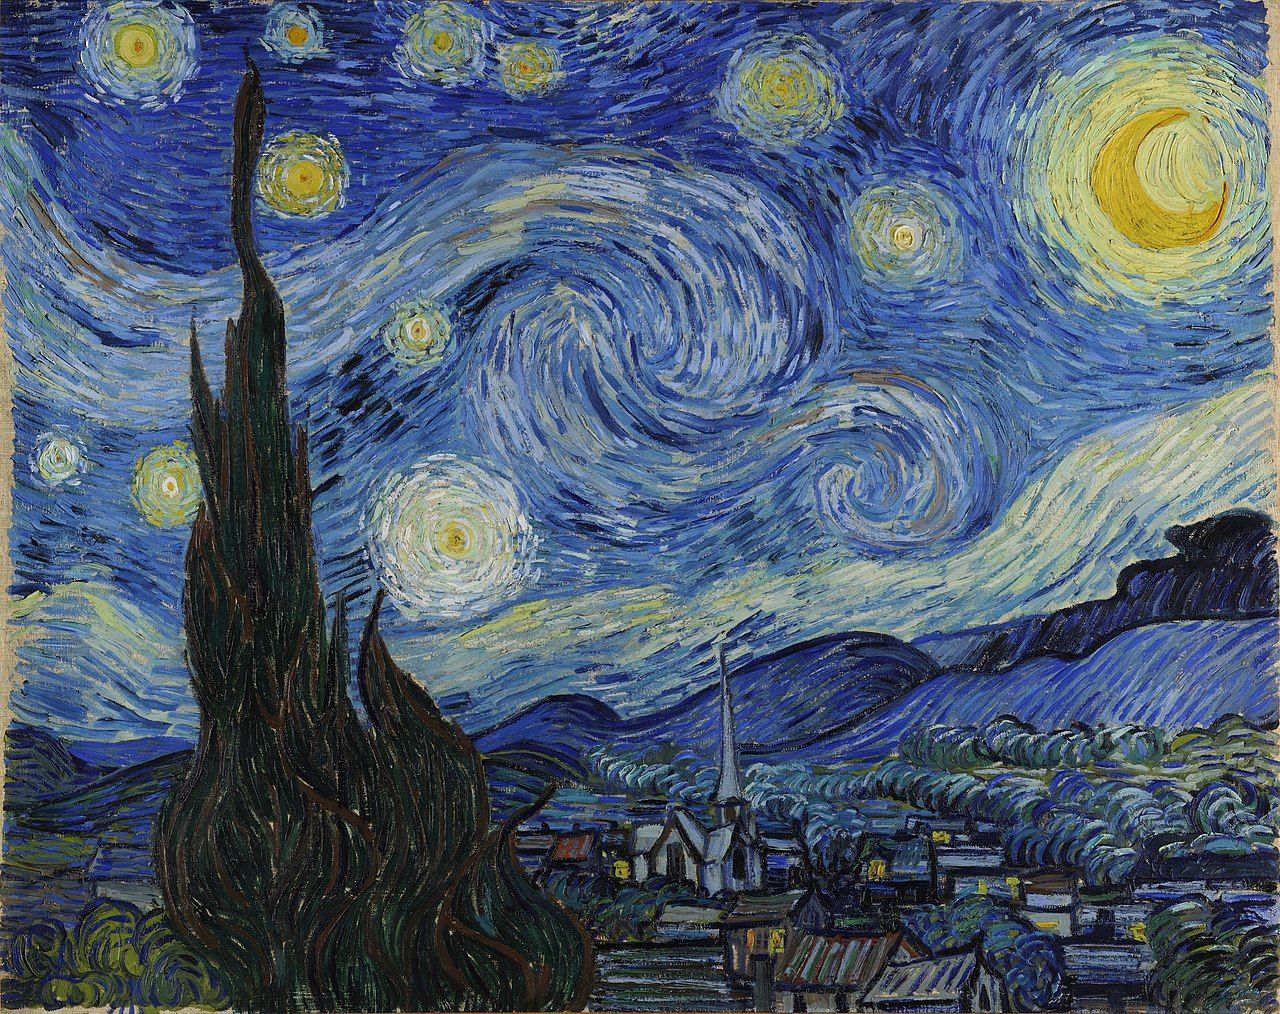 "The Starry Night" is an oil on canvas painting by Dutch Post-Impressionist painter Vincent van Gogh. Painted in June 1889, it depicts the view from the east-facing window of his asylum room at Saint-Rémy-de-Provence, just before sunrise, with the addition of an imaginary village.